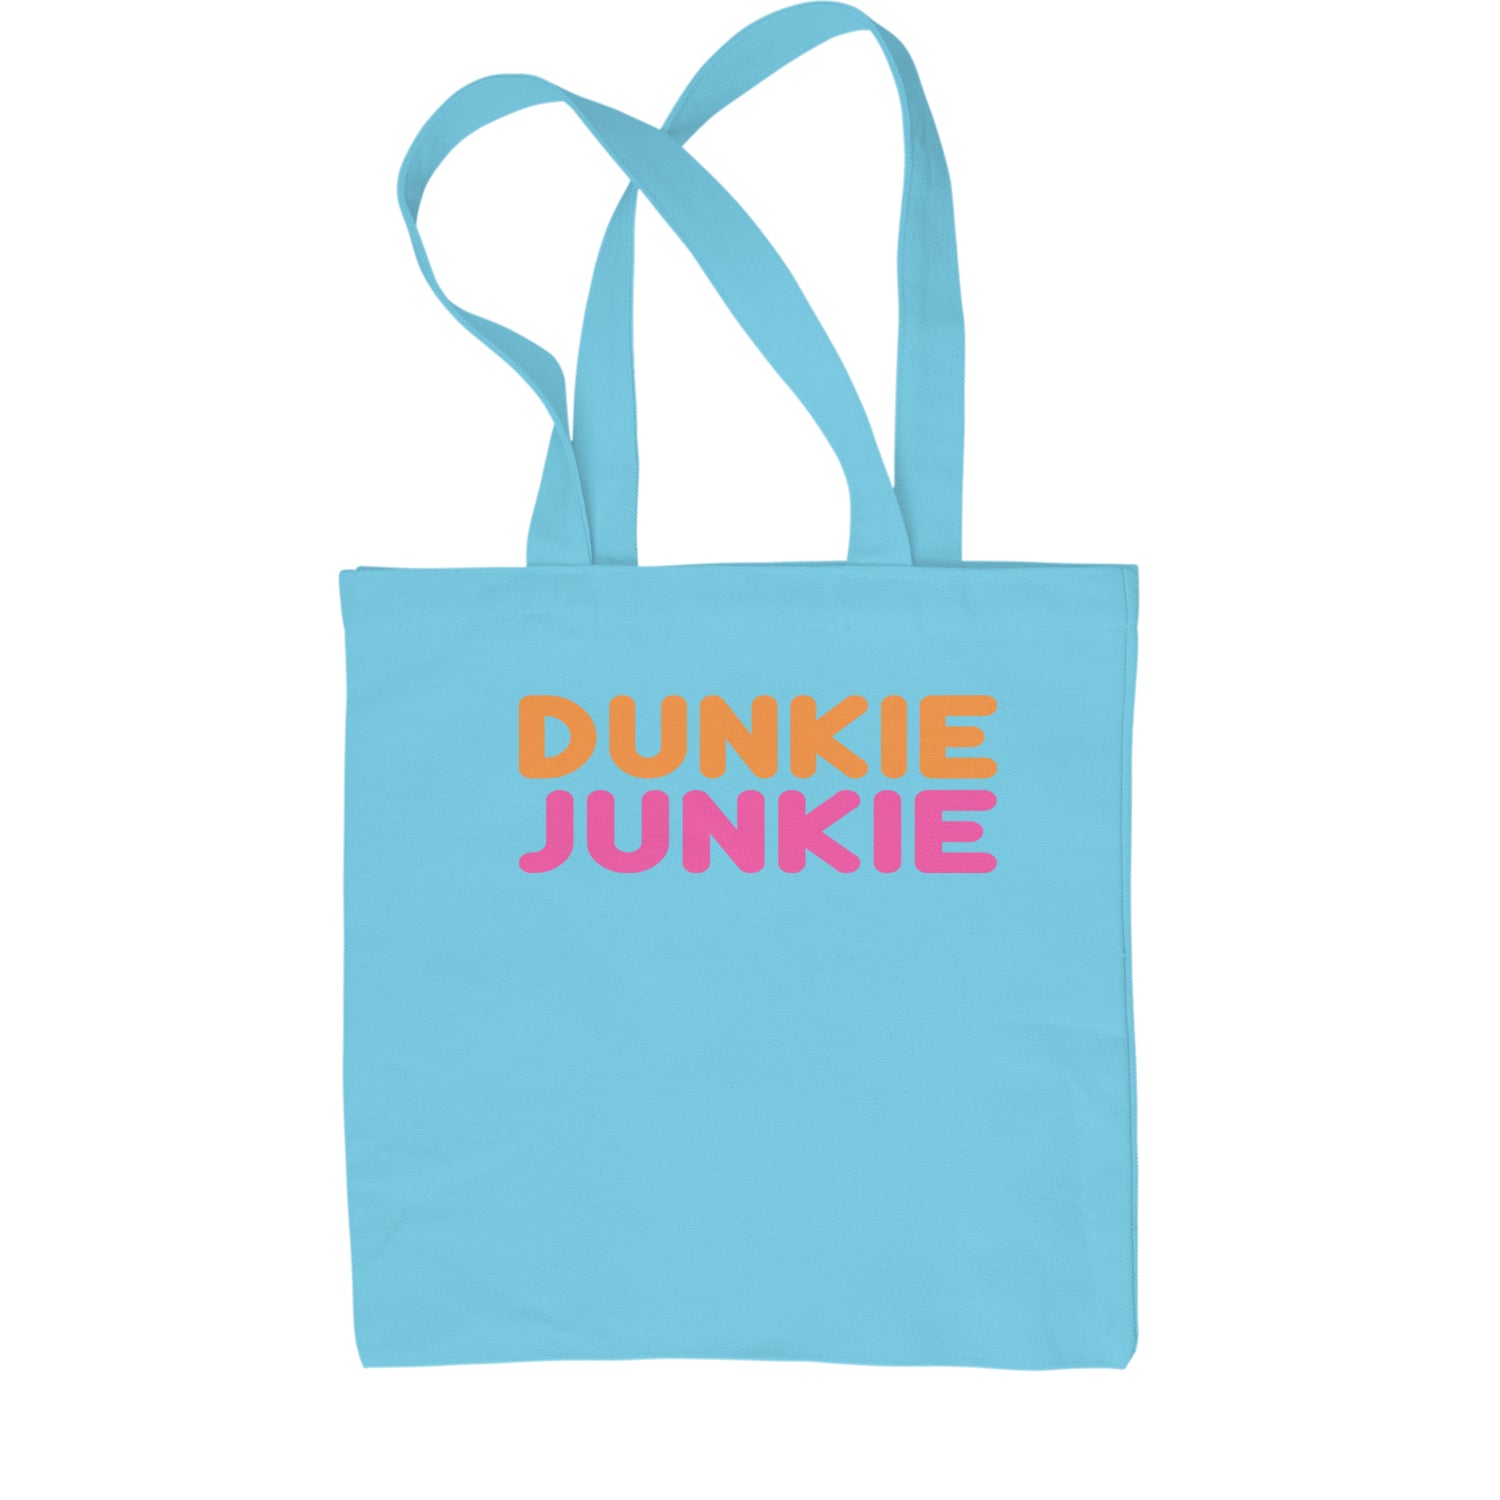 Dunkie Junkie Shopping Tote Bag addict, capuccino, coffee, dd, dnkn, dunkin, dunking, latte by Expression Tees